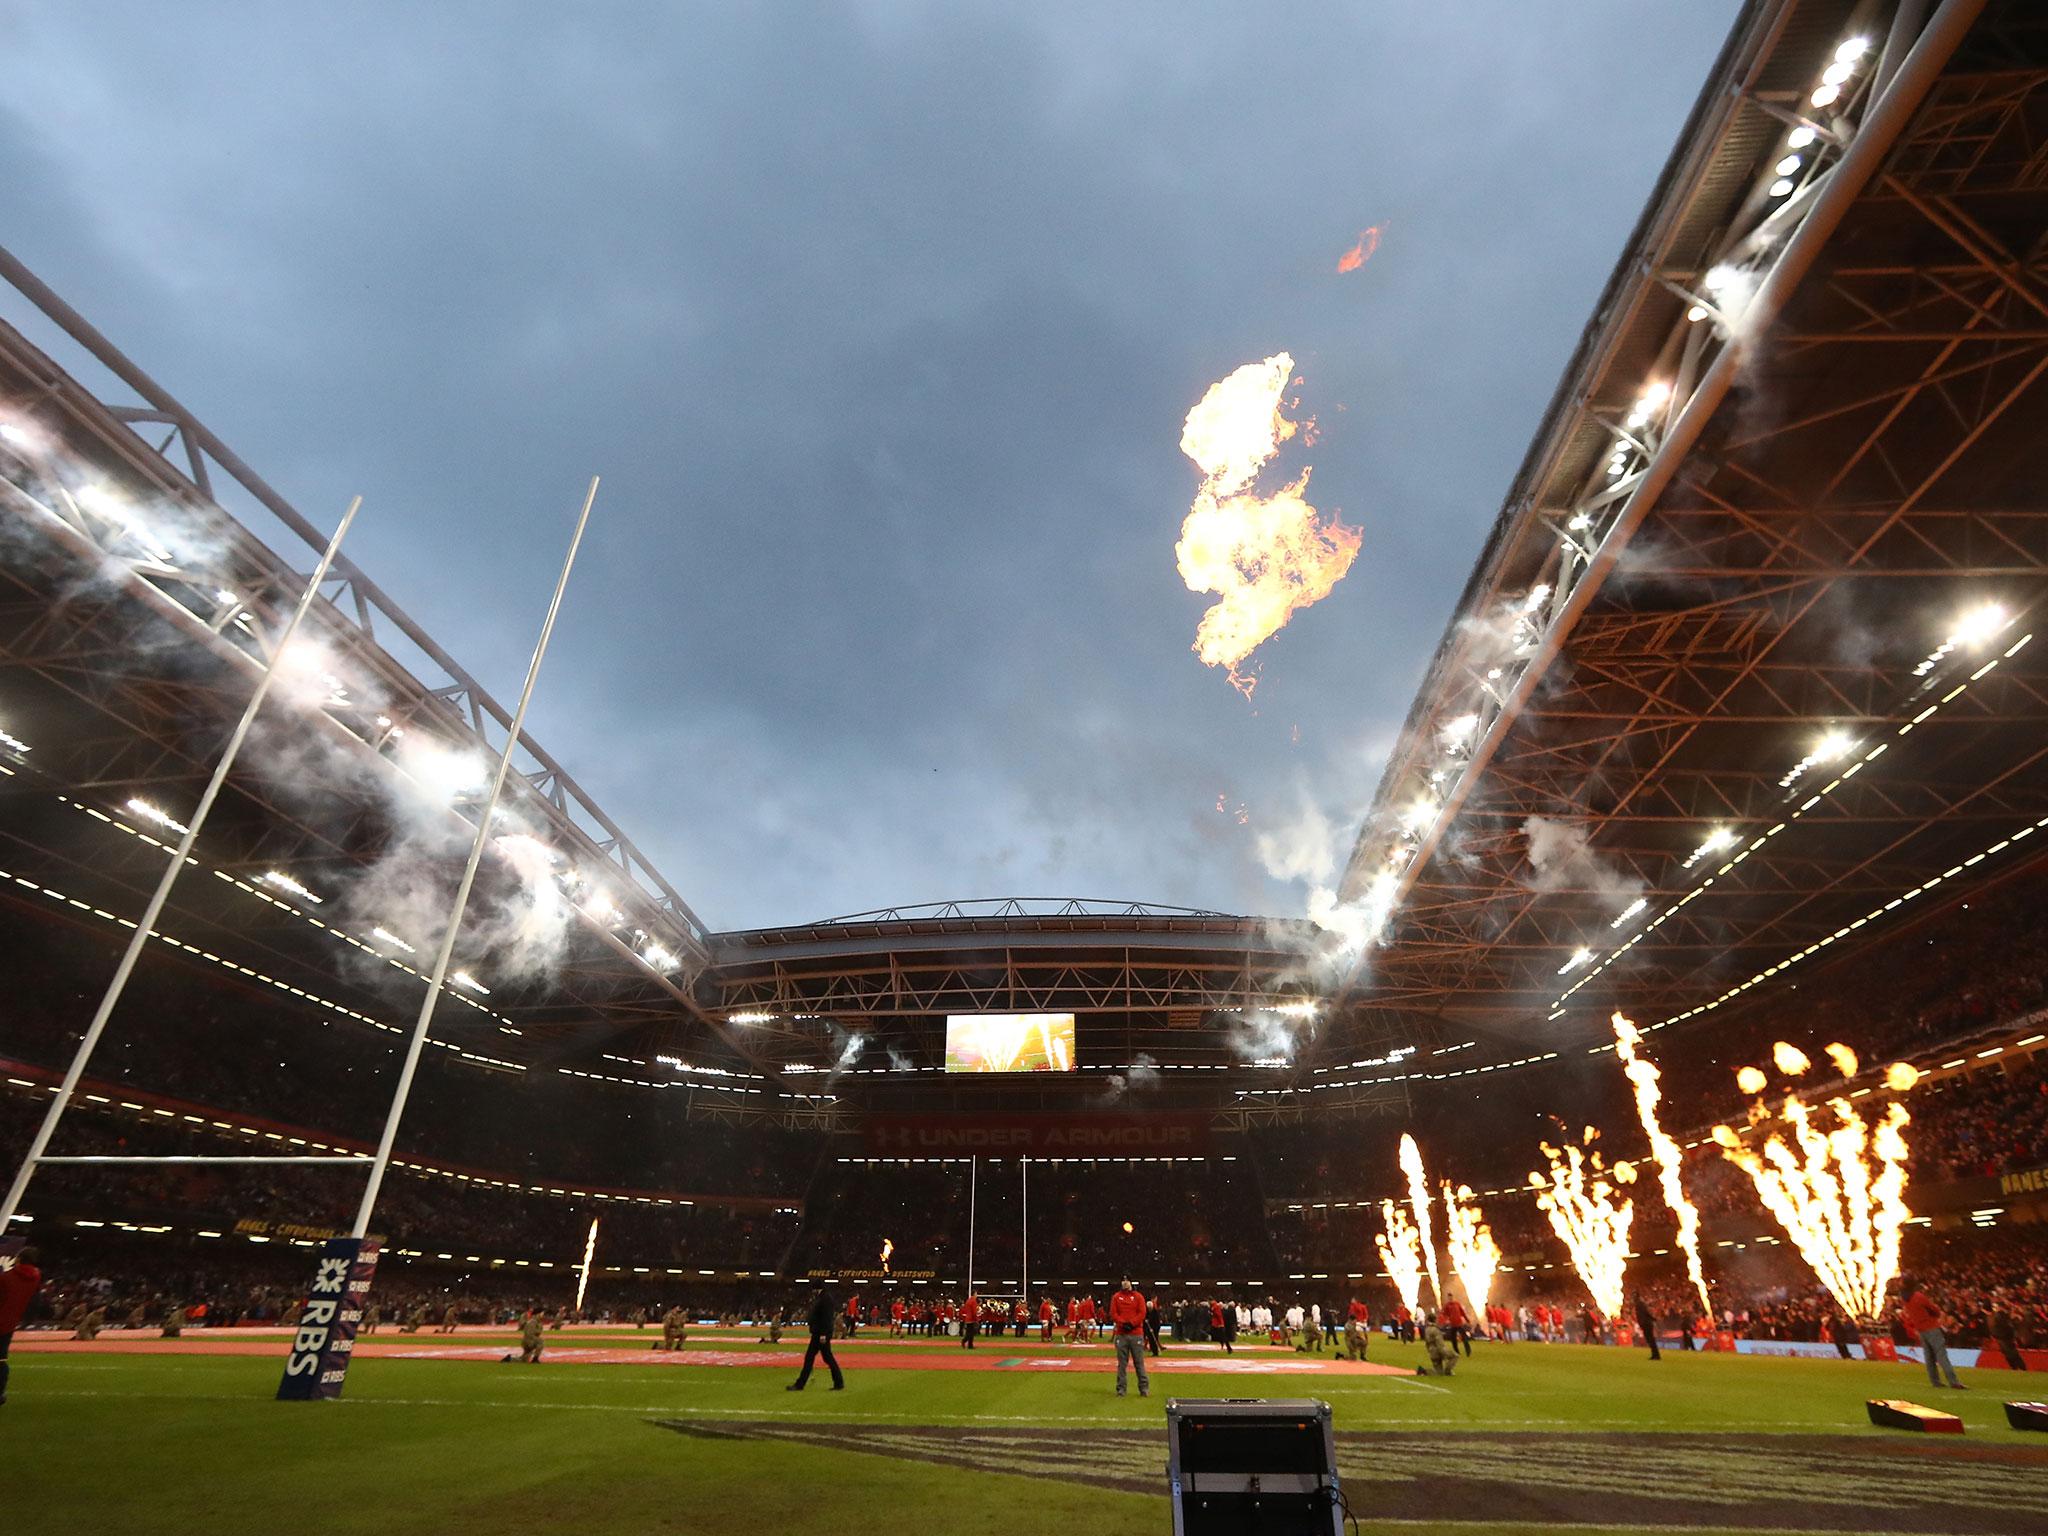 The clash in Cardiff between Wales and England did not disappoint